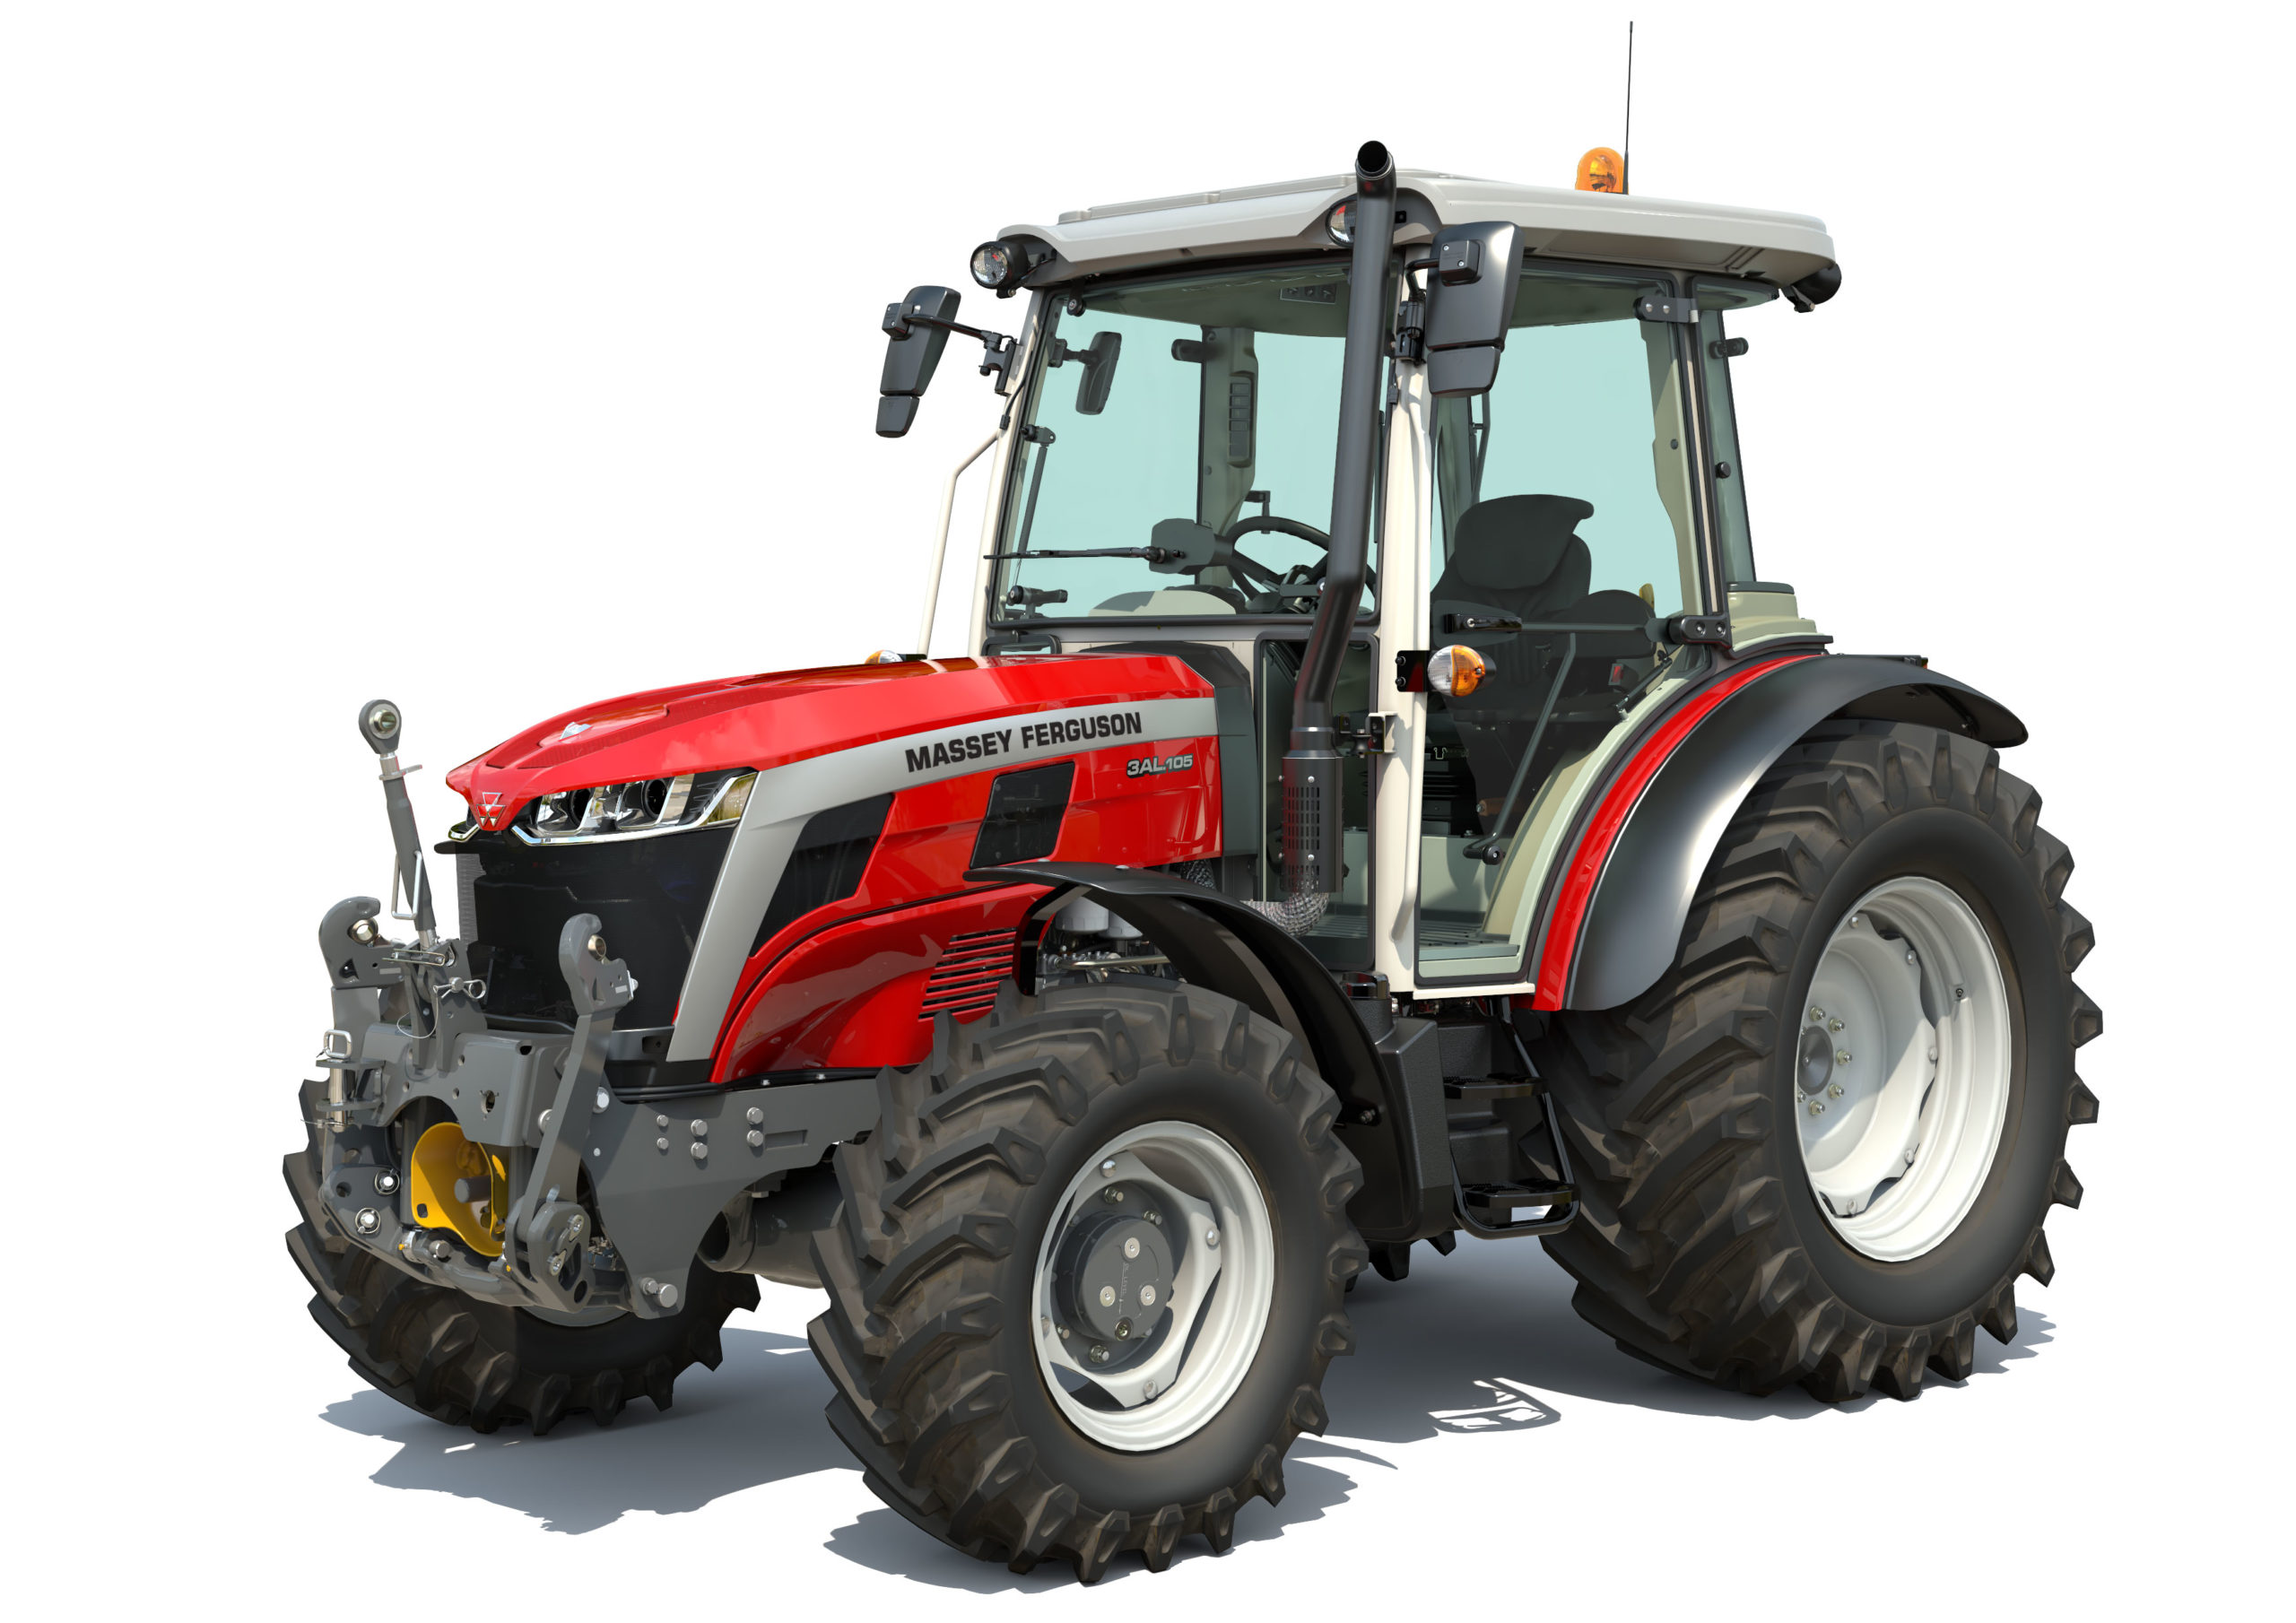 Latest Massey Ferguson MF 3 Speciality Series deliver the perfect choice for every sector